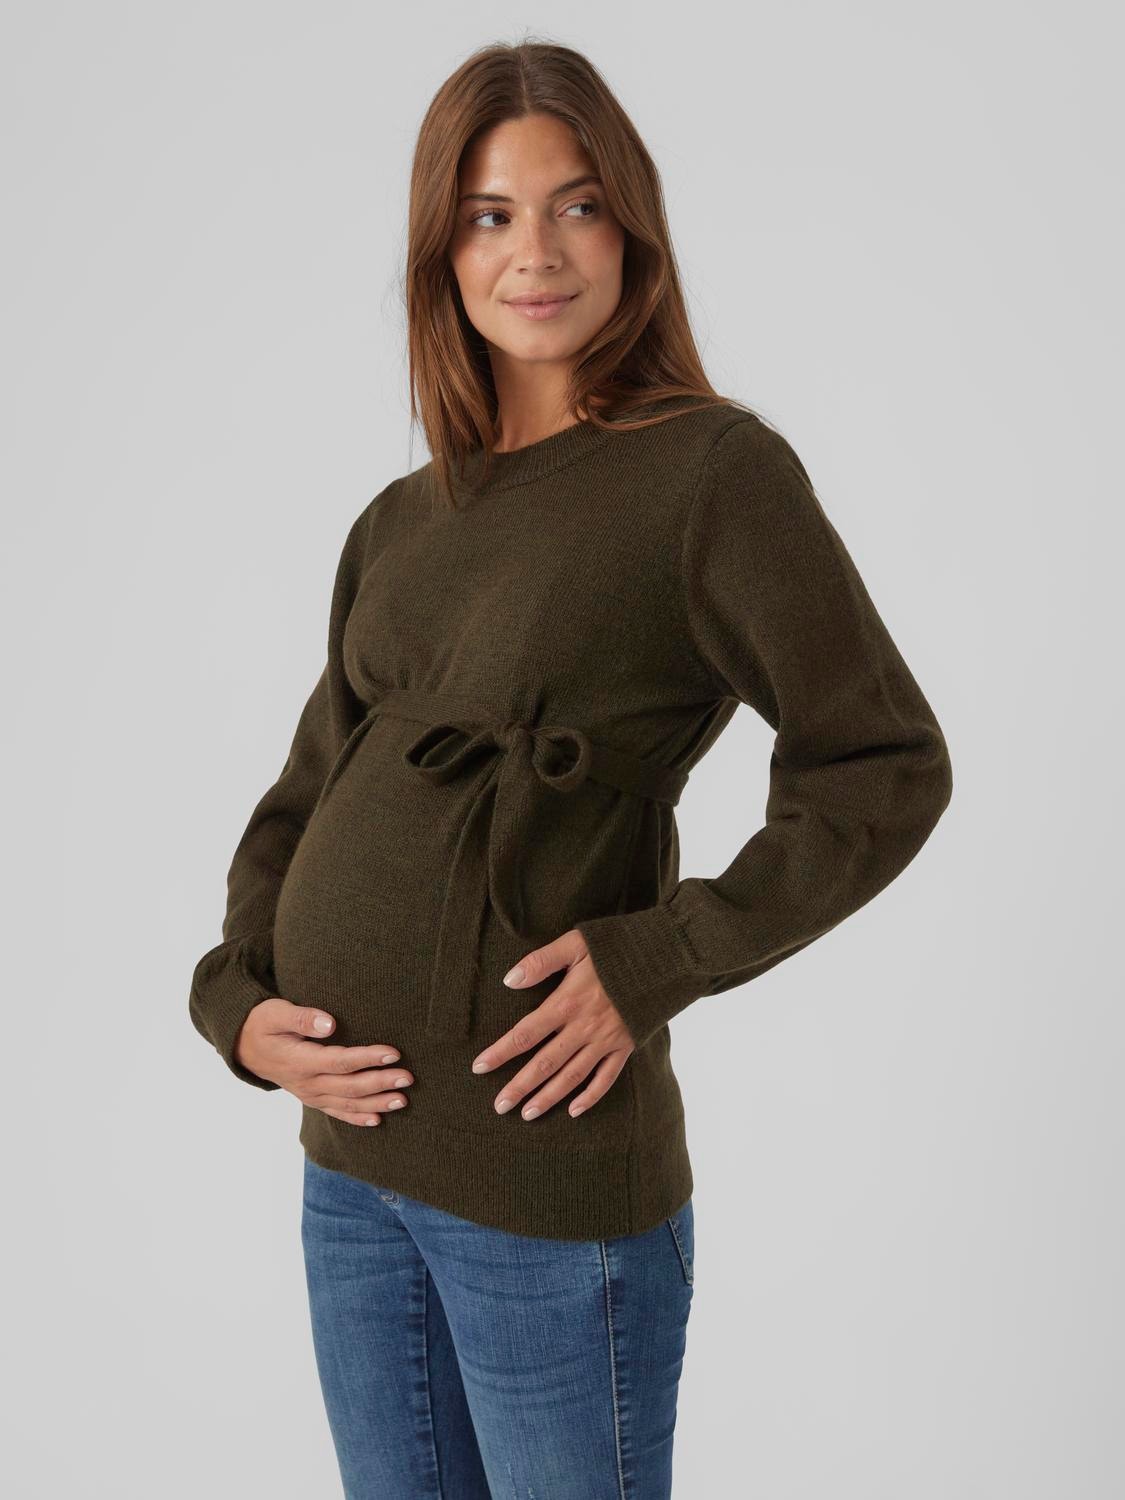 MAMA.LICIOUS Knitted maternity-pullover -Grape Leaf - 20016830